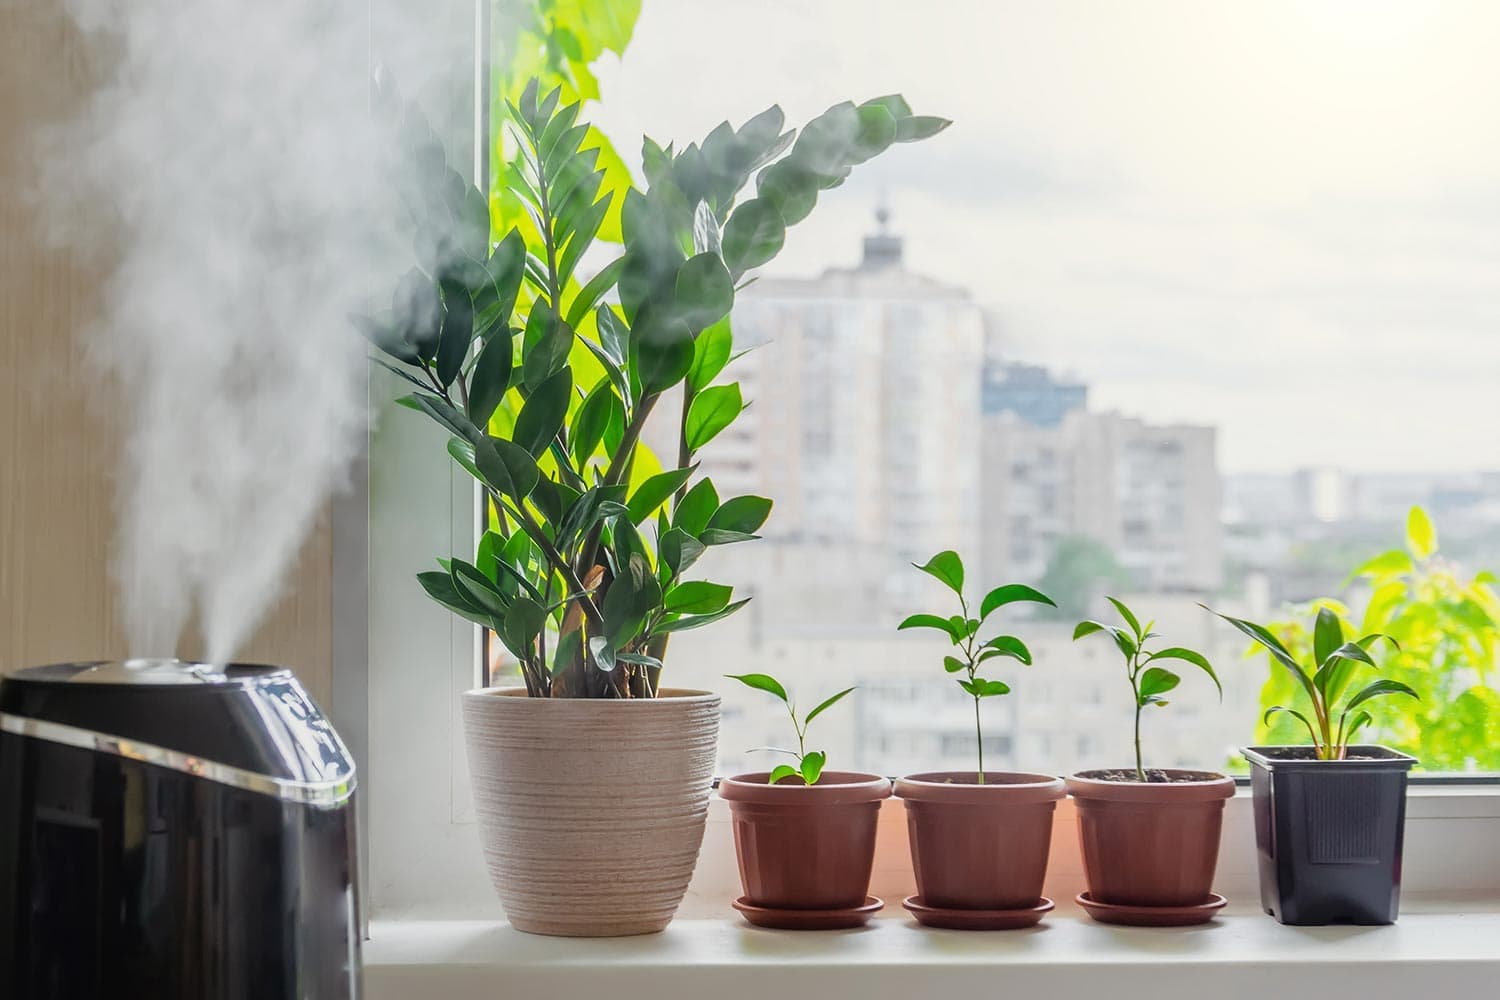 Indoor decorative and deciduous plants on the windowsill in an apartment with a steam humidifier